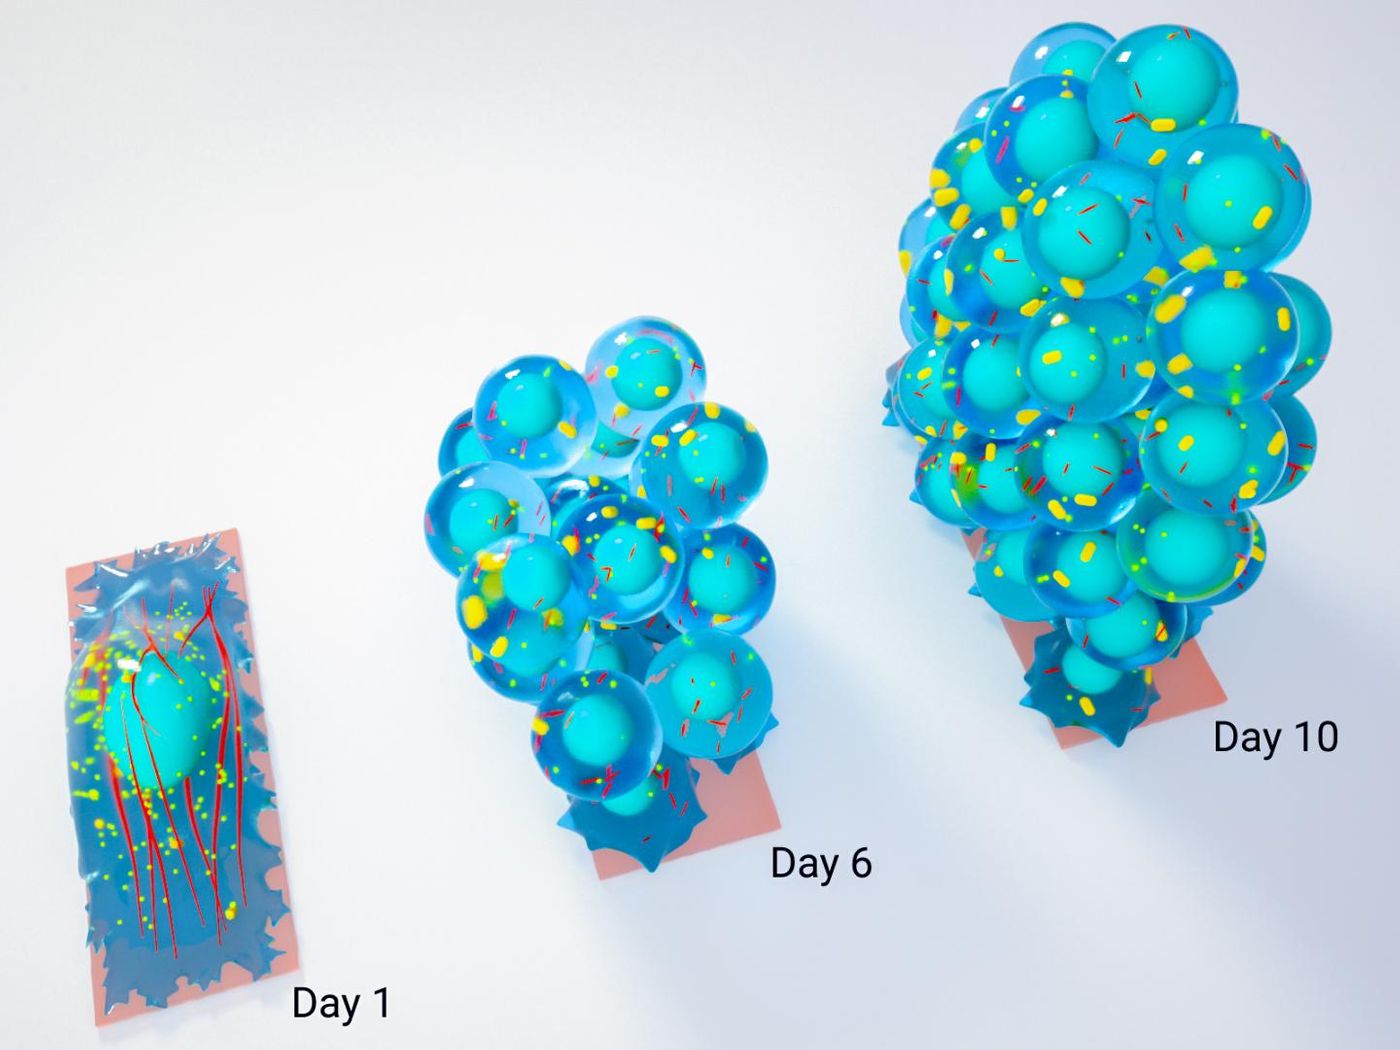 A schematic showing the growth of a spherical cluster of stem cells from a mature cell on a confined substrate. / Credit: Mechanobiology Institute